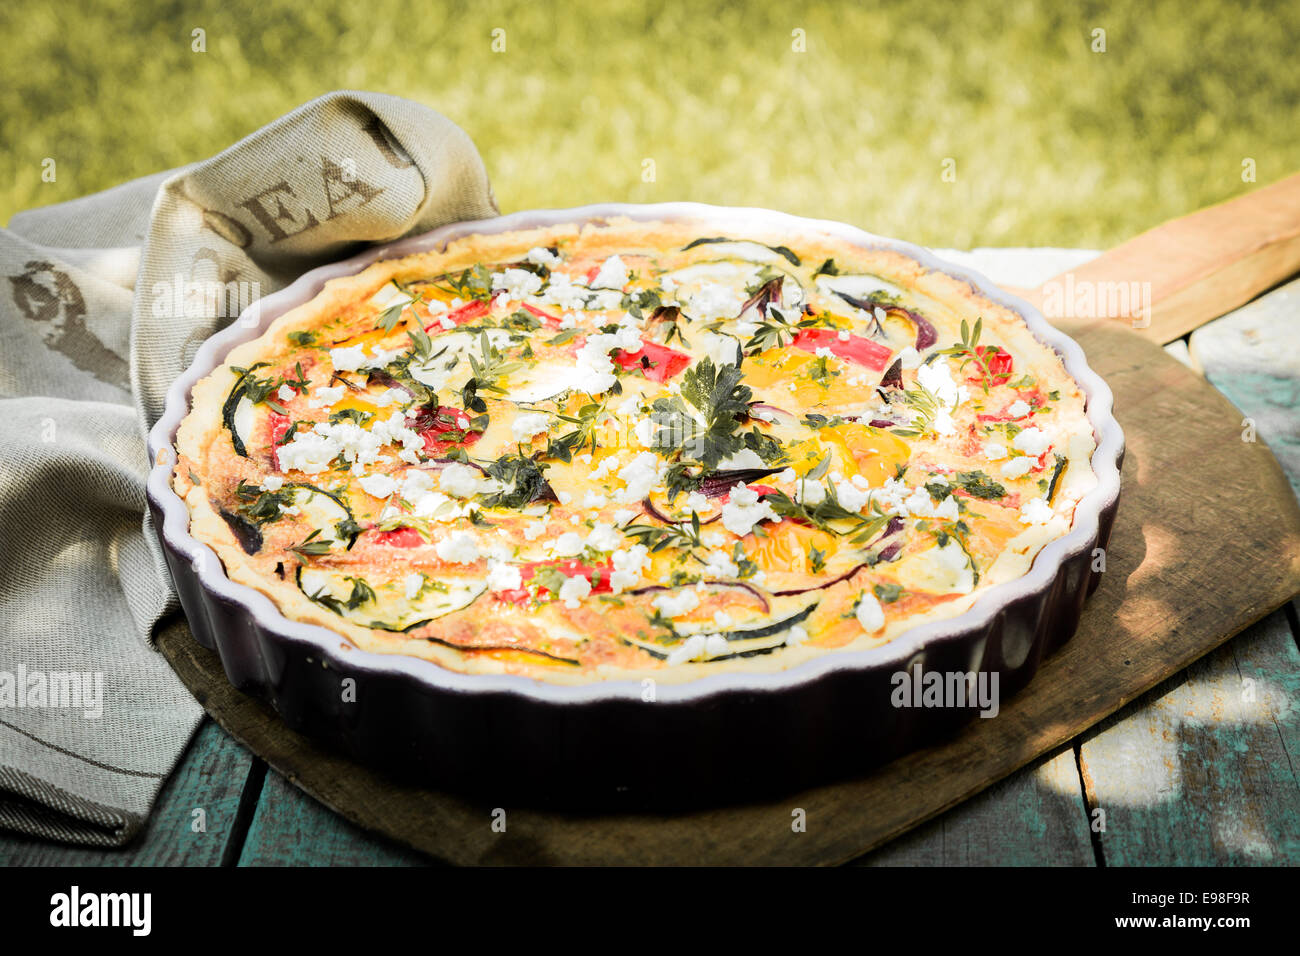 Tasty vegetarian quiche on a summer picnic table outdoors with eggplant, eggs, cheese, tomato and herbs for a healthy lunchtime Stock Photo